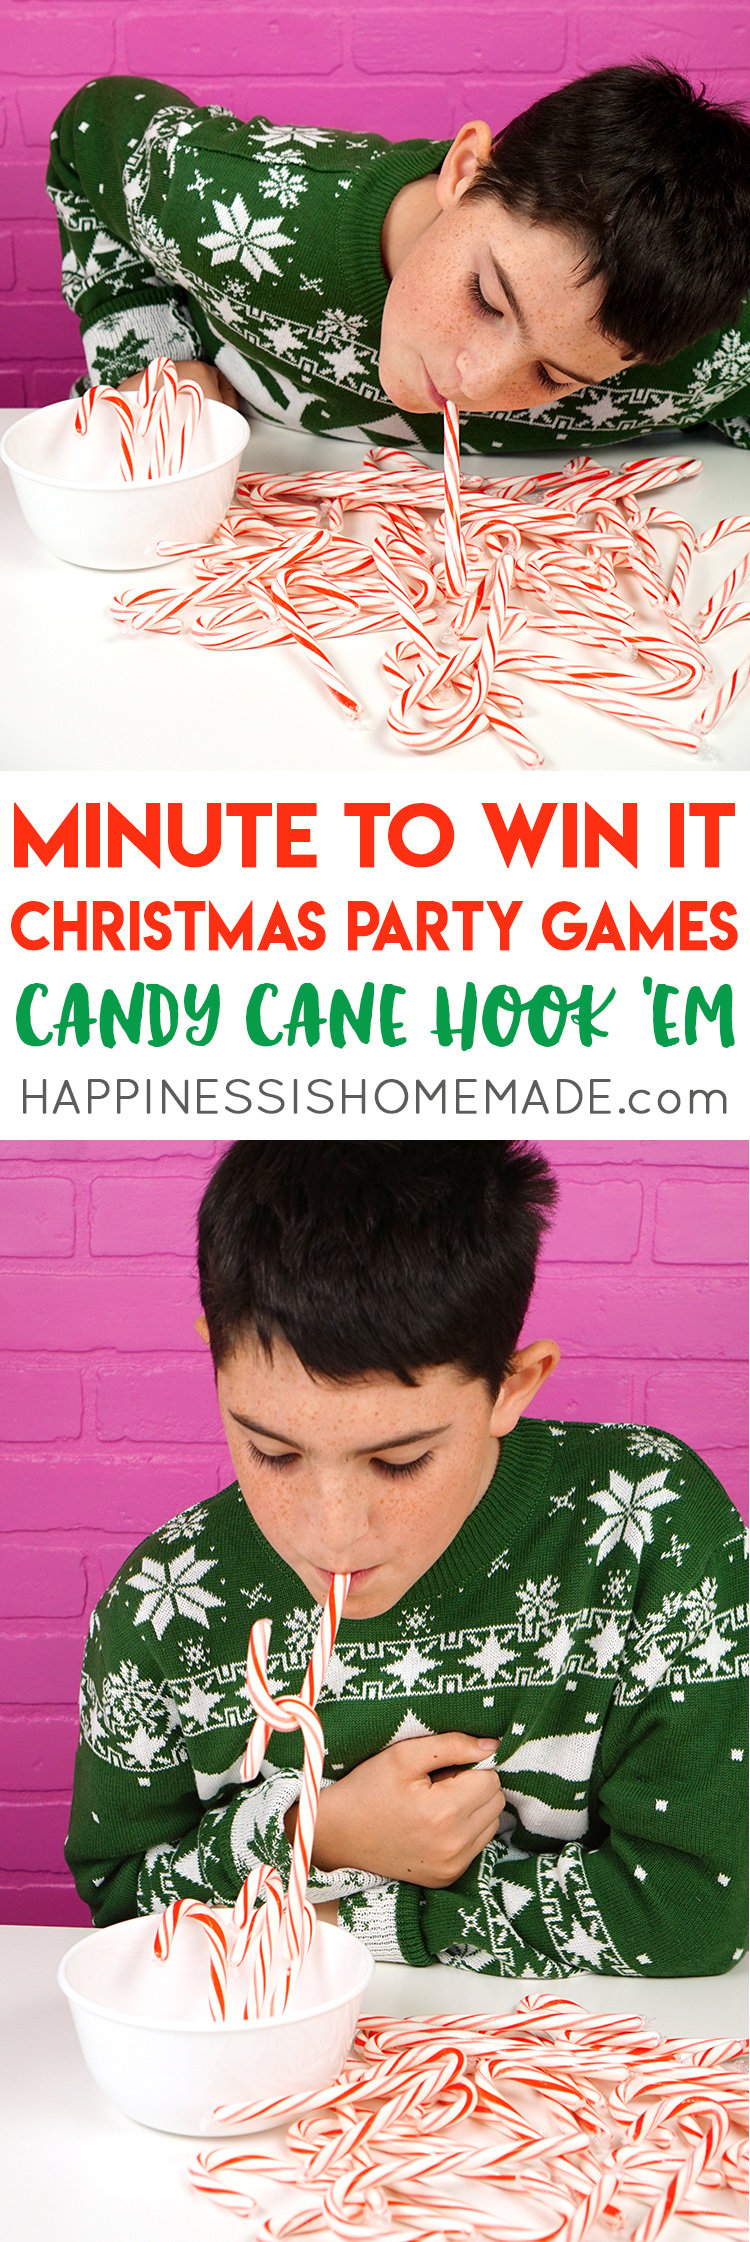 Minute to Win It Christmas Games for All Ages - Happiness is Homemade